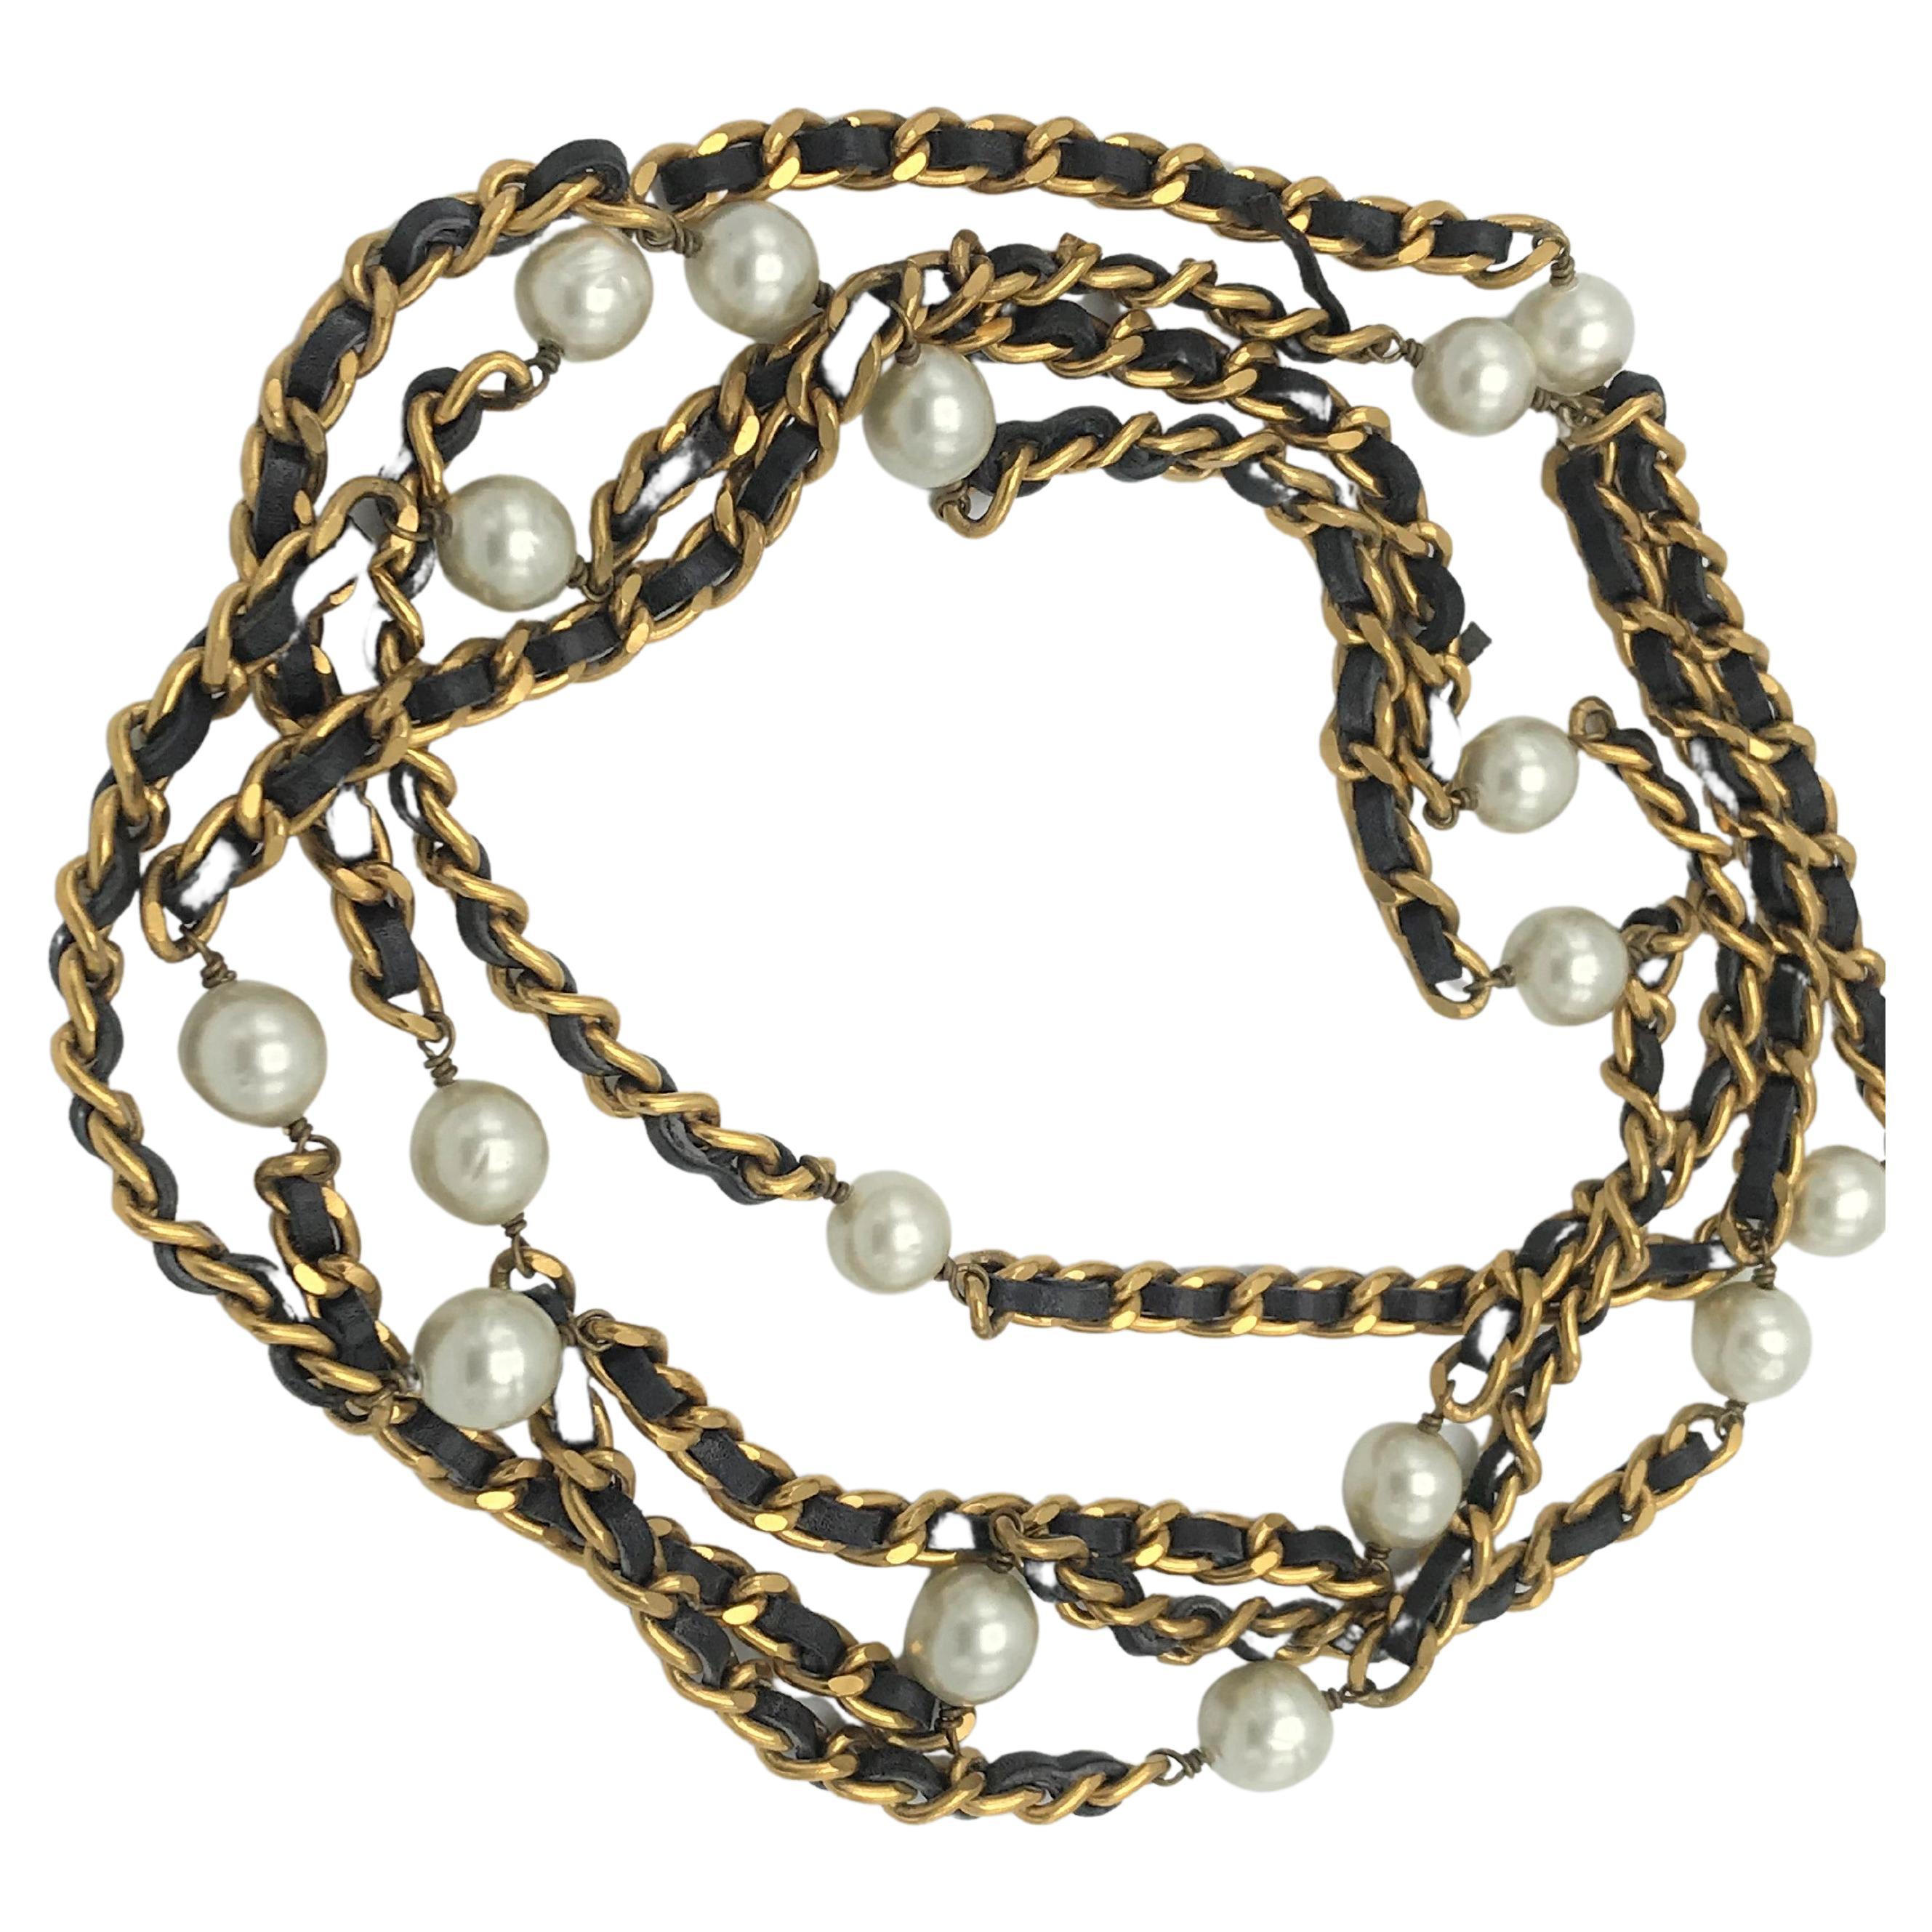 Iconic Chanel chain with leather woven throughout and Chanel pearls, 1990s